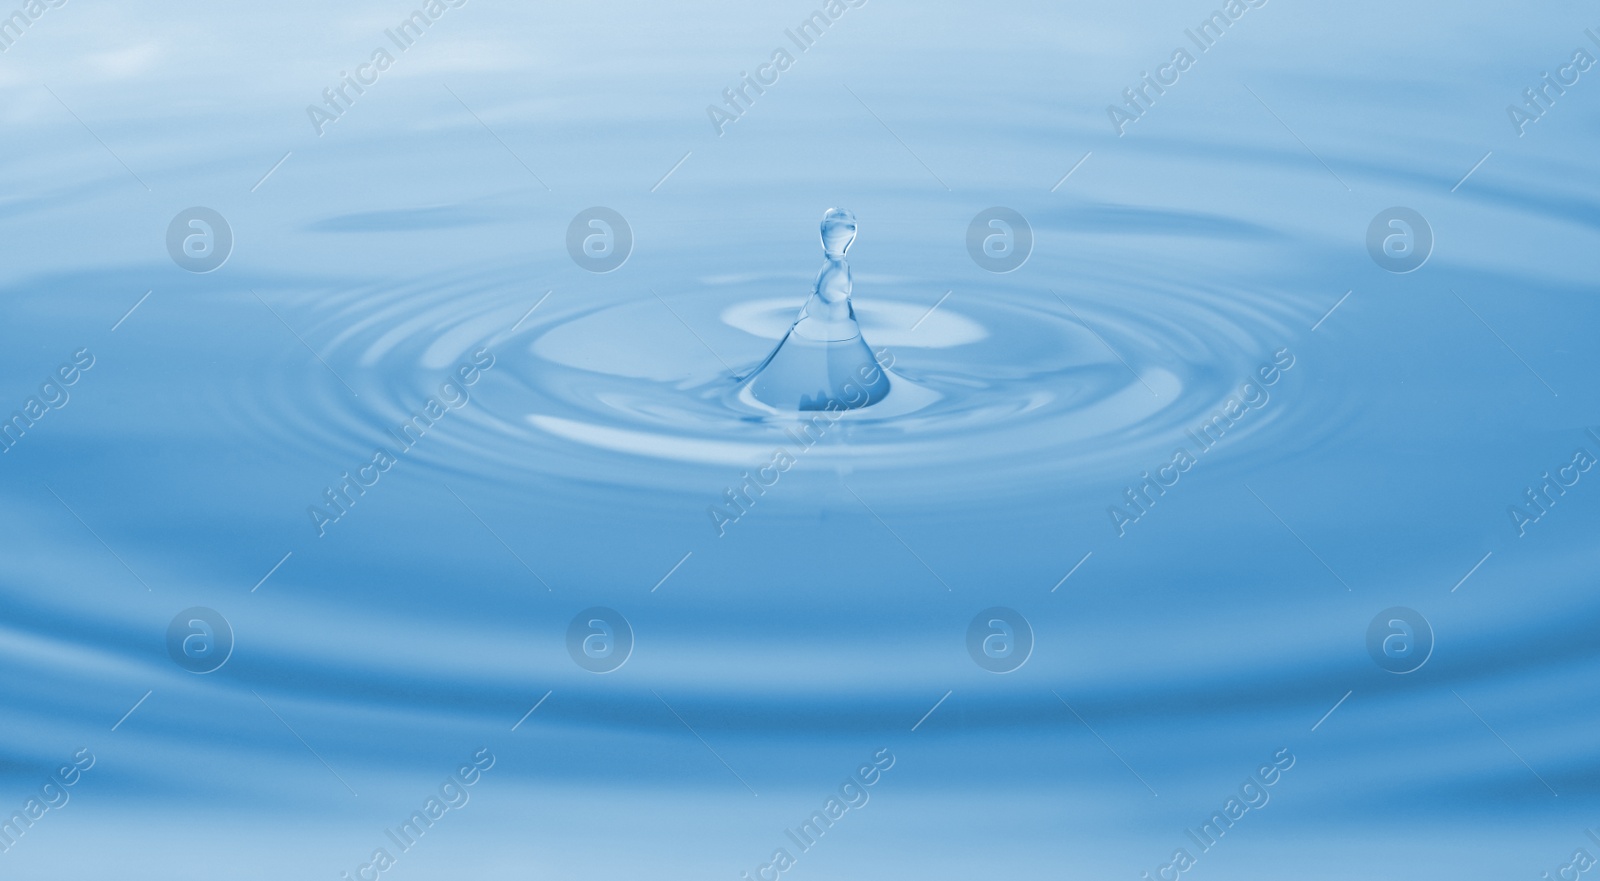 Photo of Splash of water with drops as background, closeup